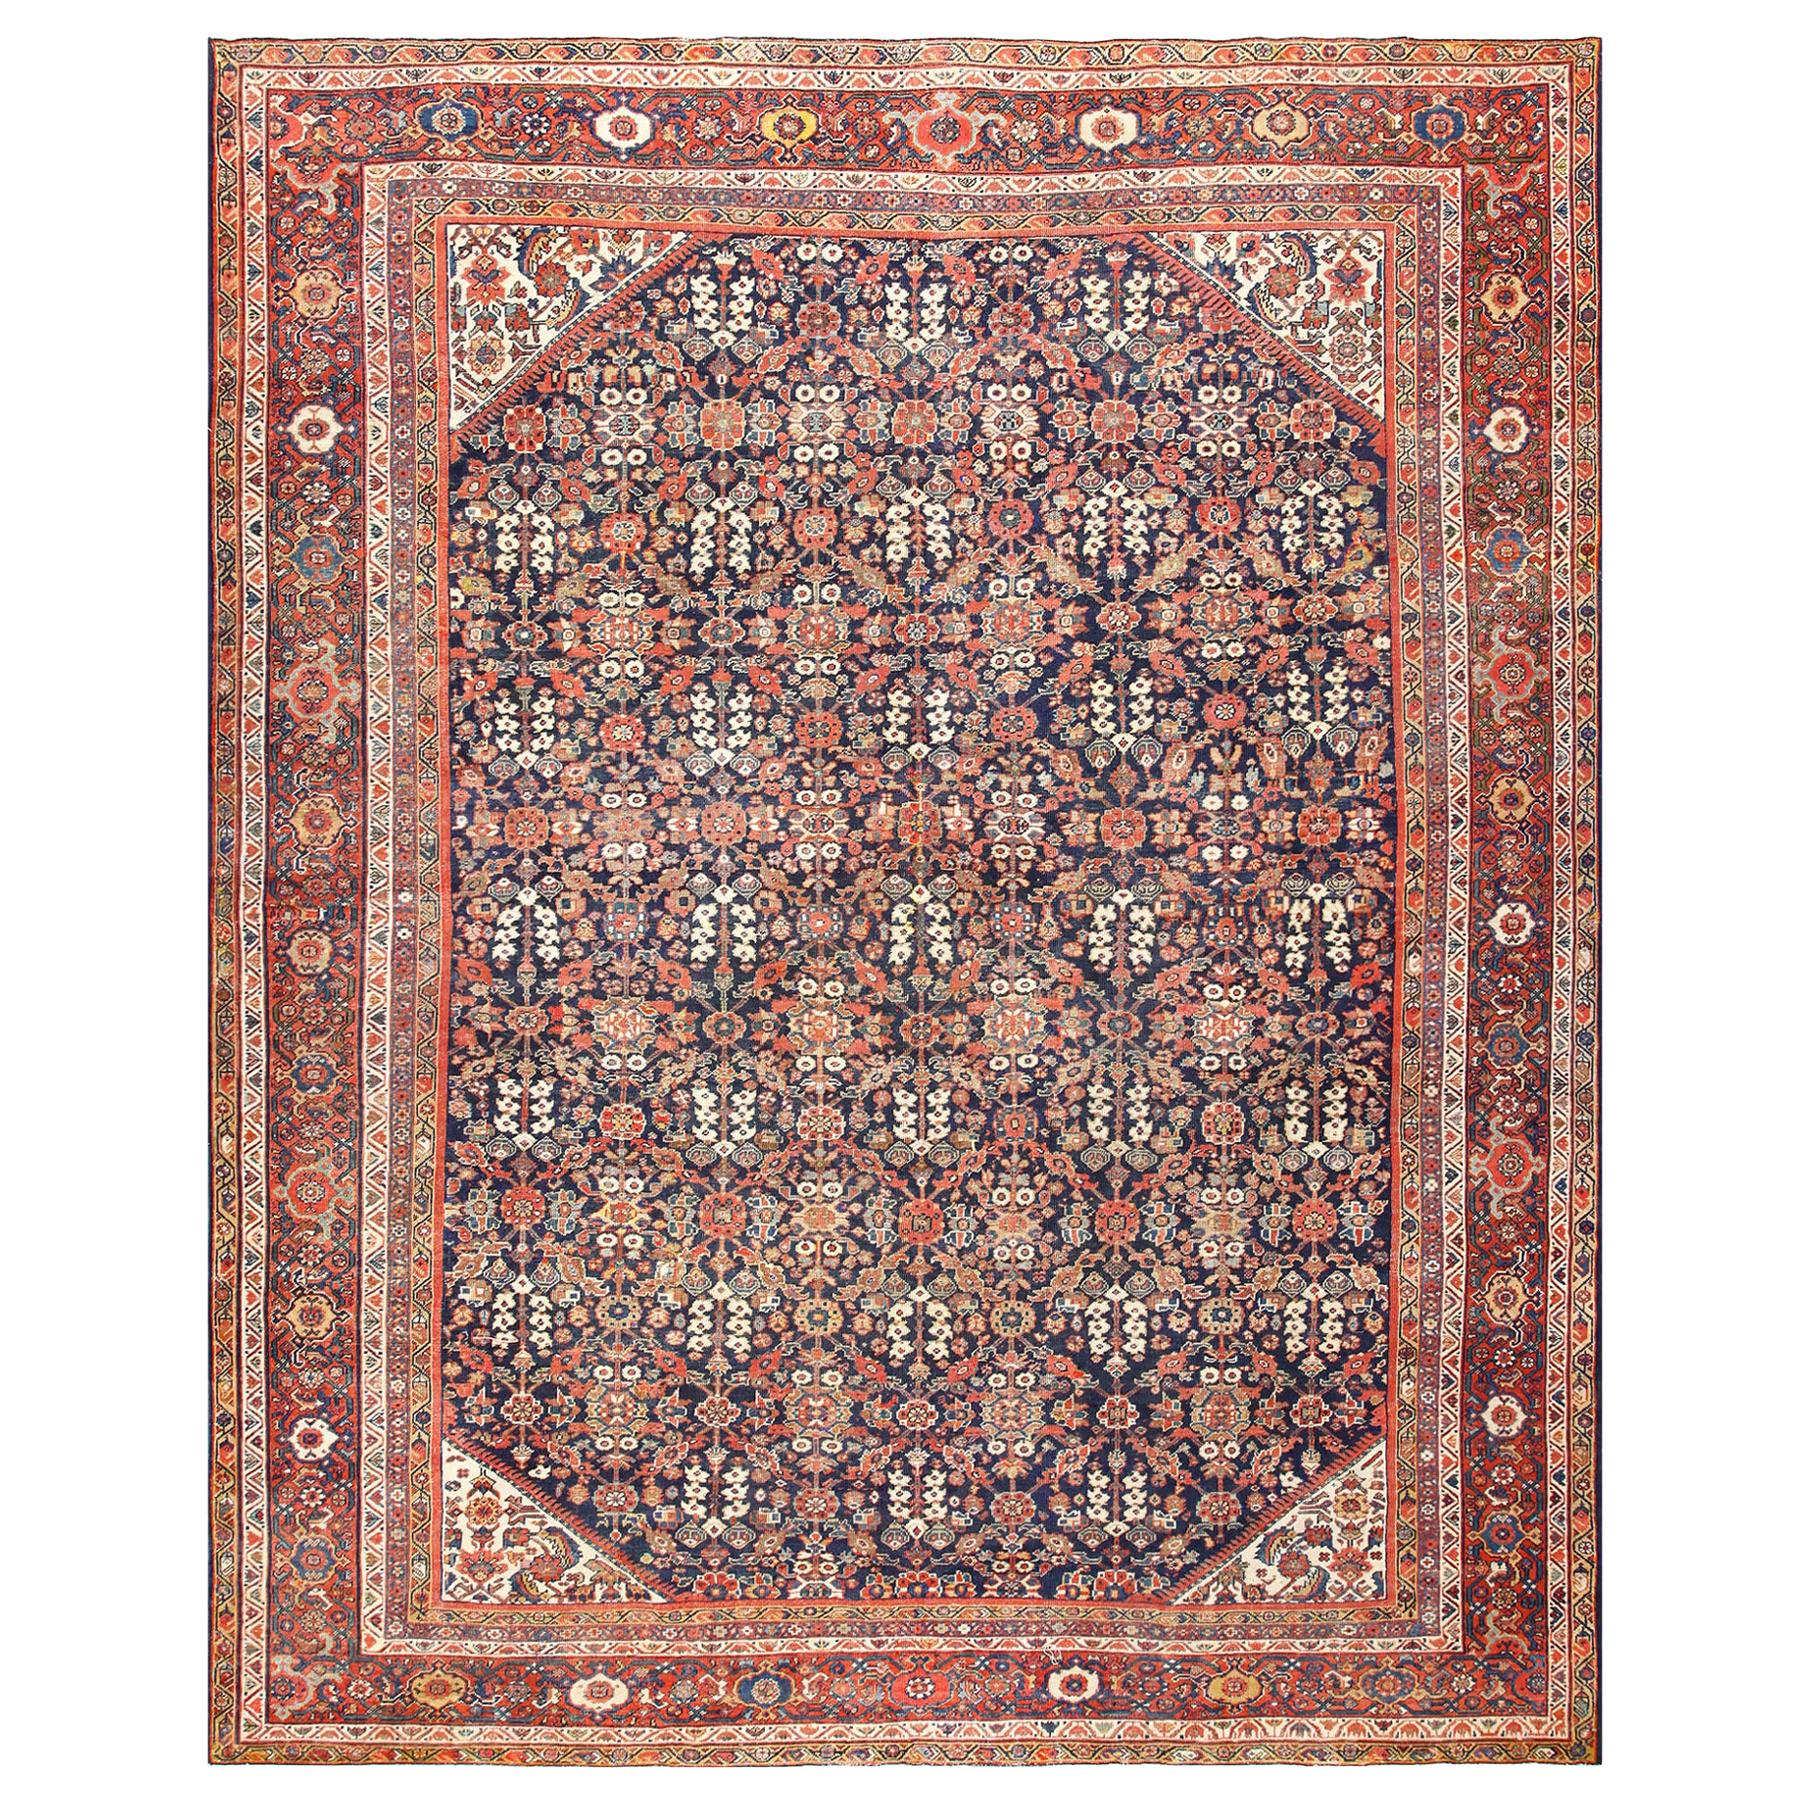 Blue Background Persian Antique Sultanabad Rug. Size: 11 ft x 13 ft 4 in